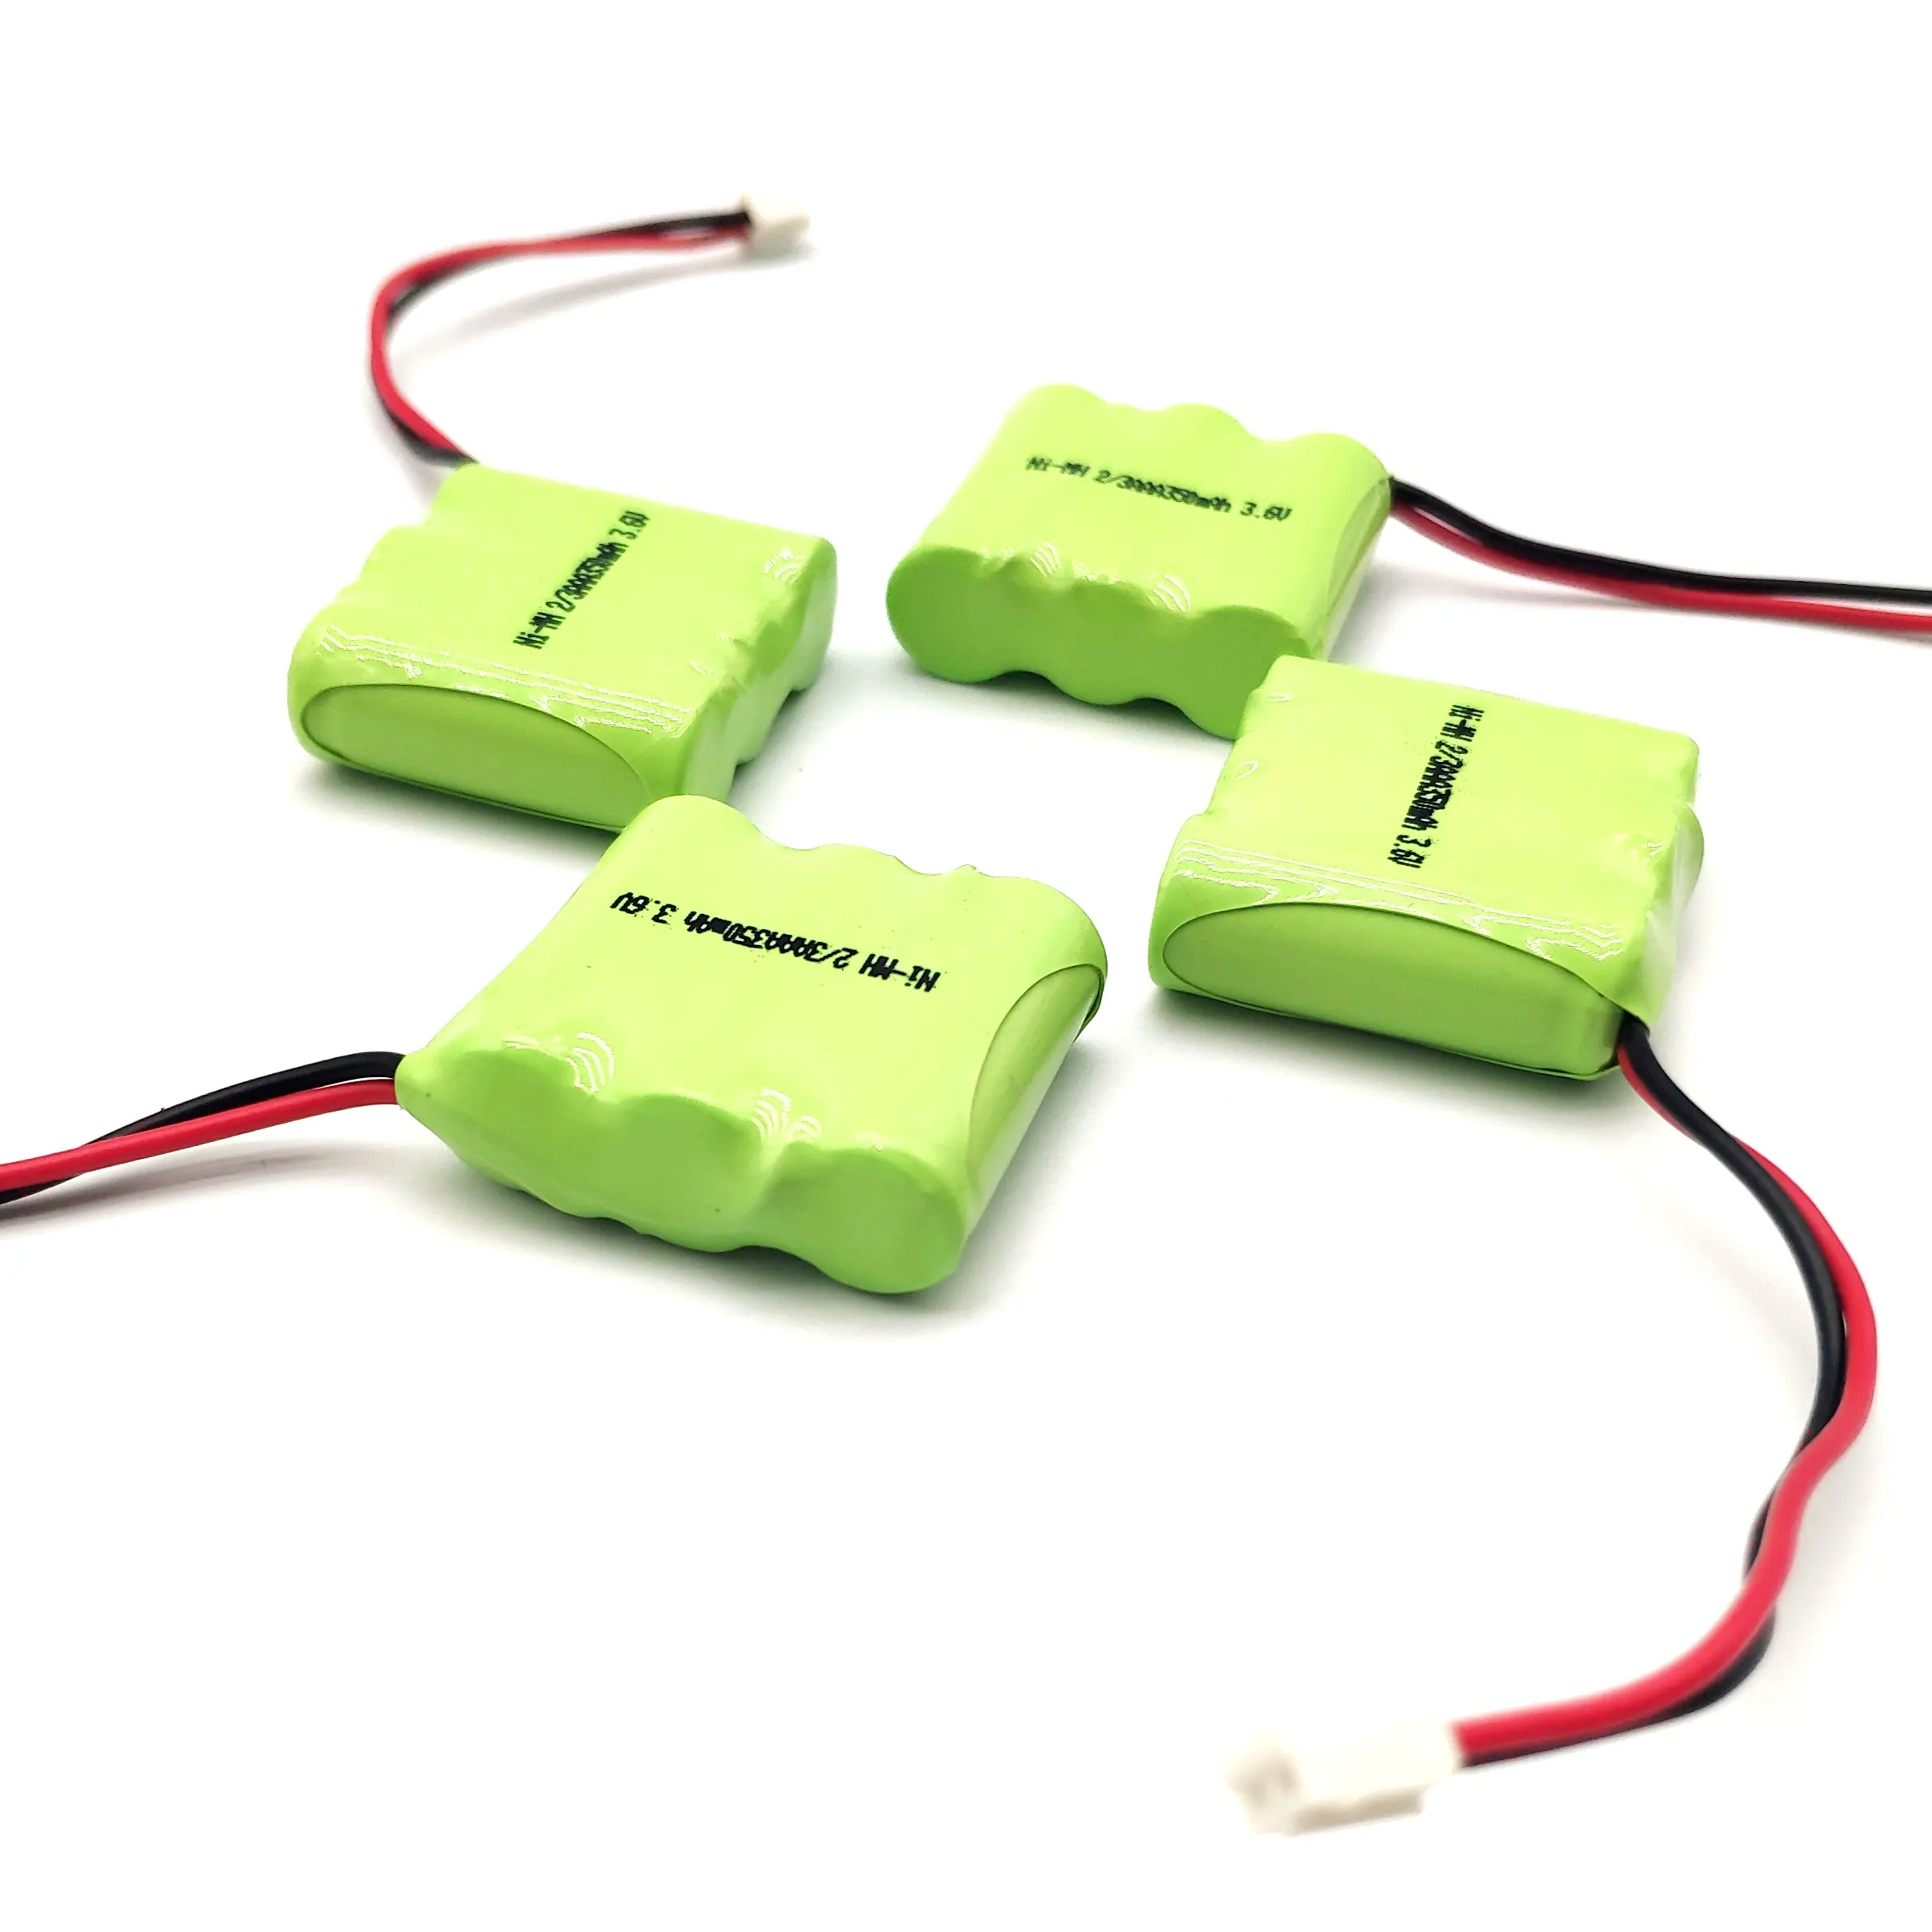 Wholesale rechargeable NiMH Battery pack 3.6v aaa 750mAh manufacturer with CE ROHS FCC PSE UL2054 UL1062 IEC62133 MSDS UN38.3